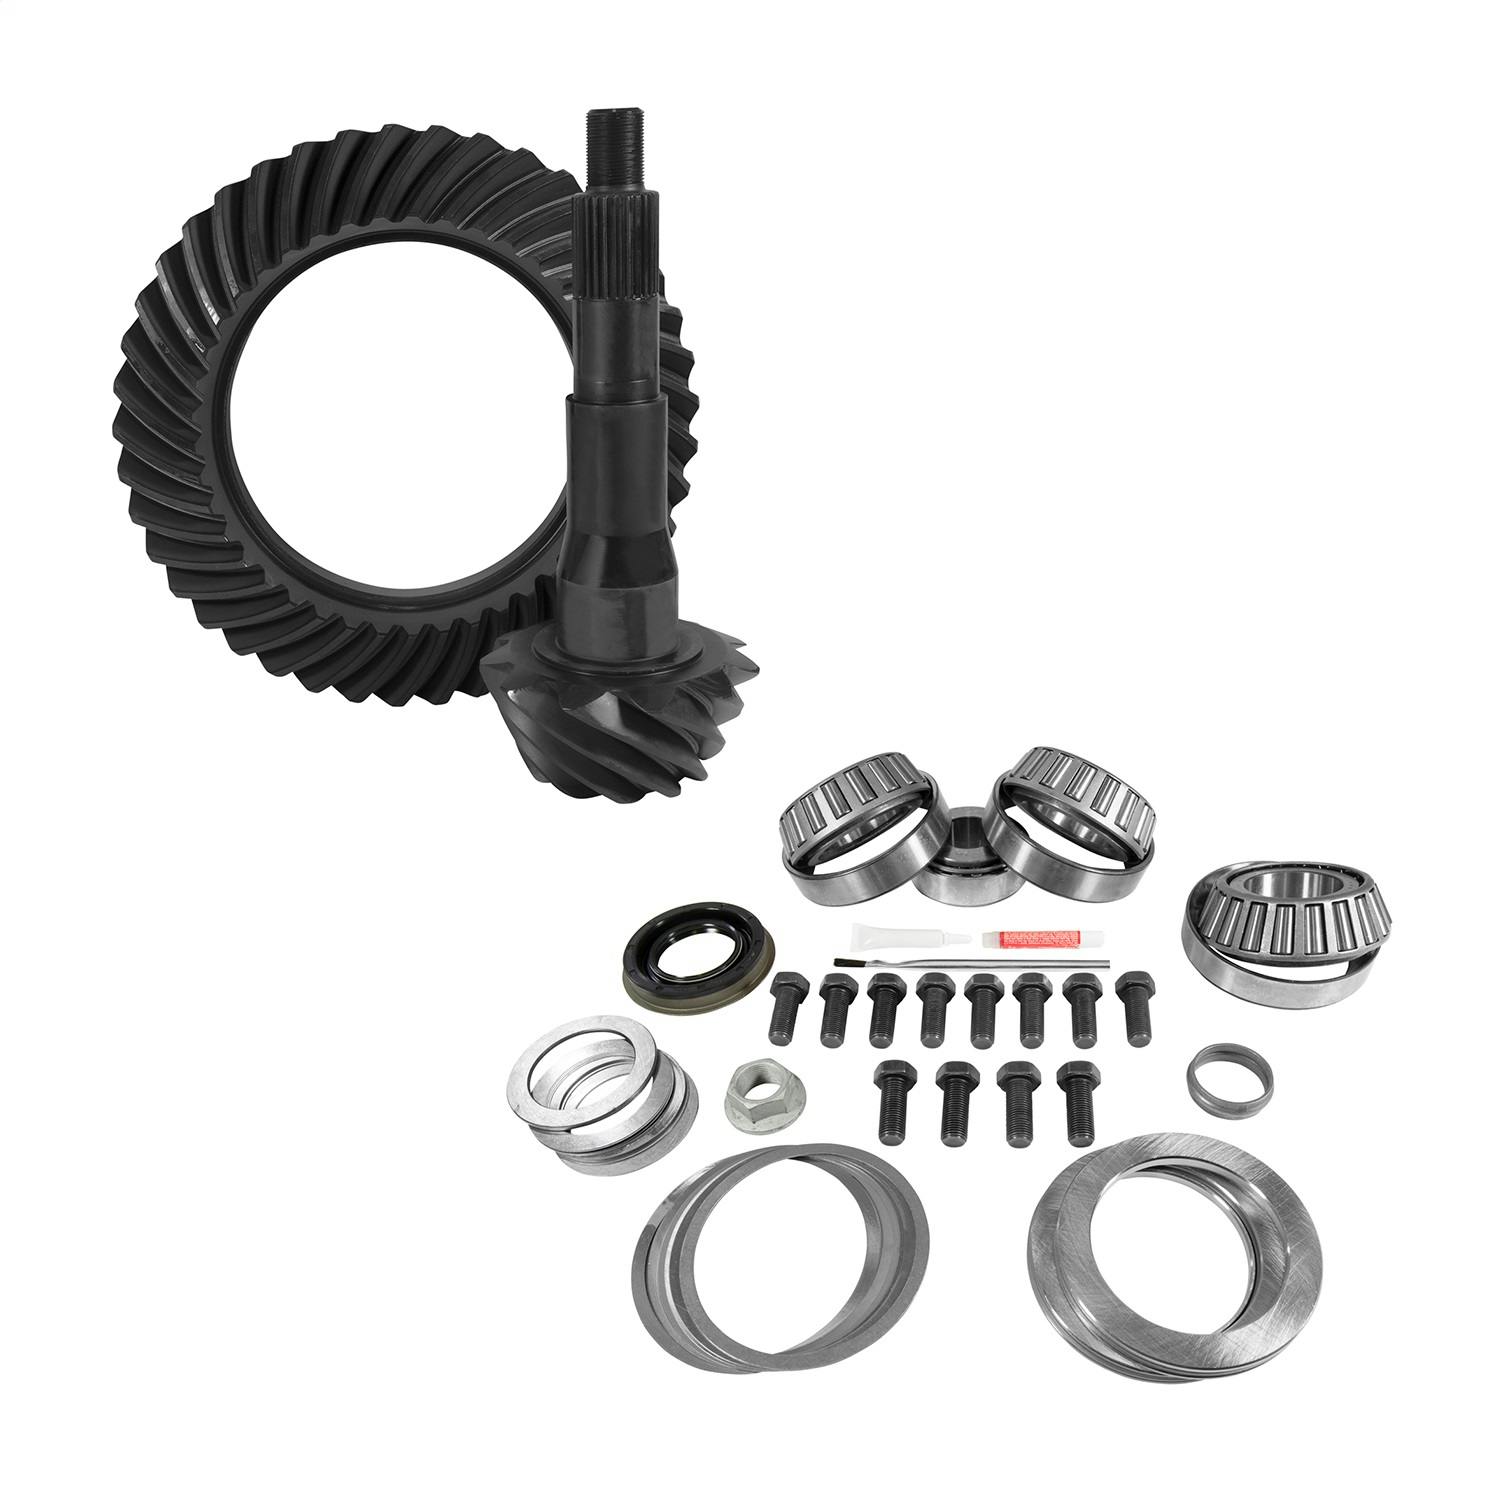 USA Standard Gear ZGK2137 10.5in. Ford 4.30 Rear Ring/Pinion and Install Kit